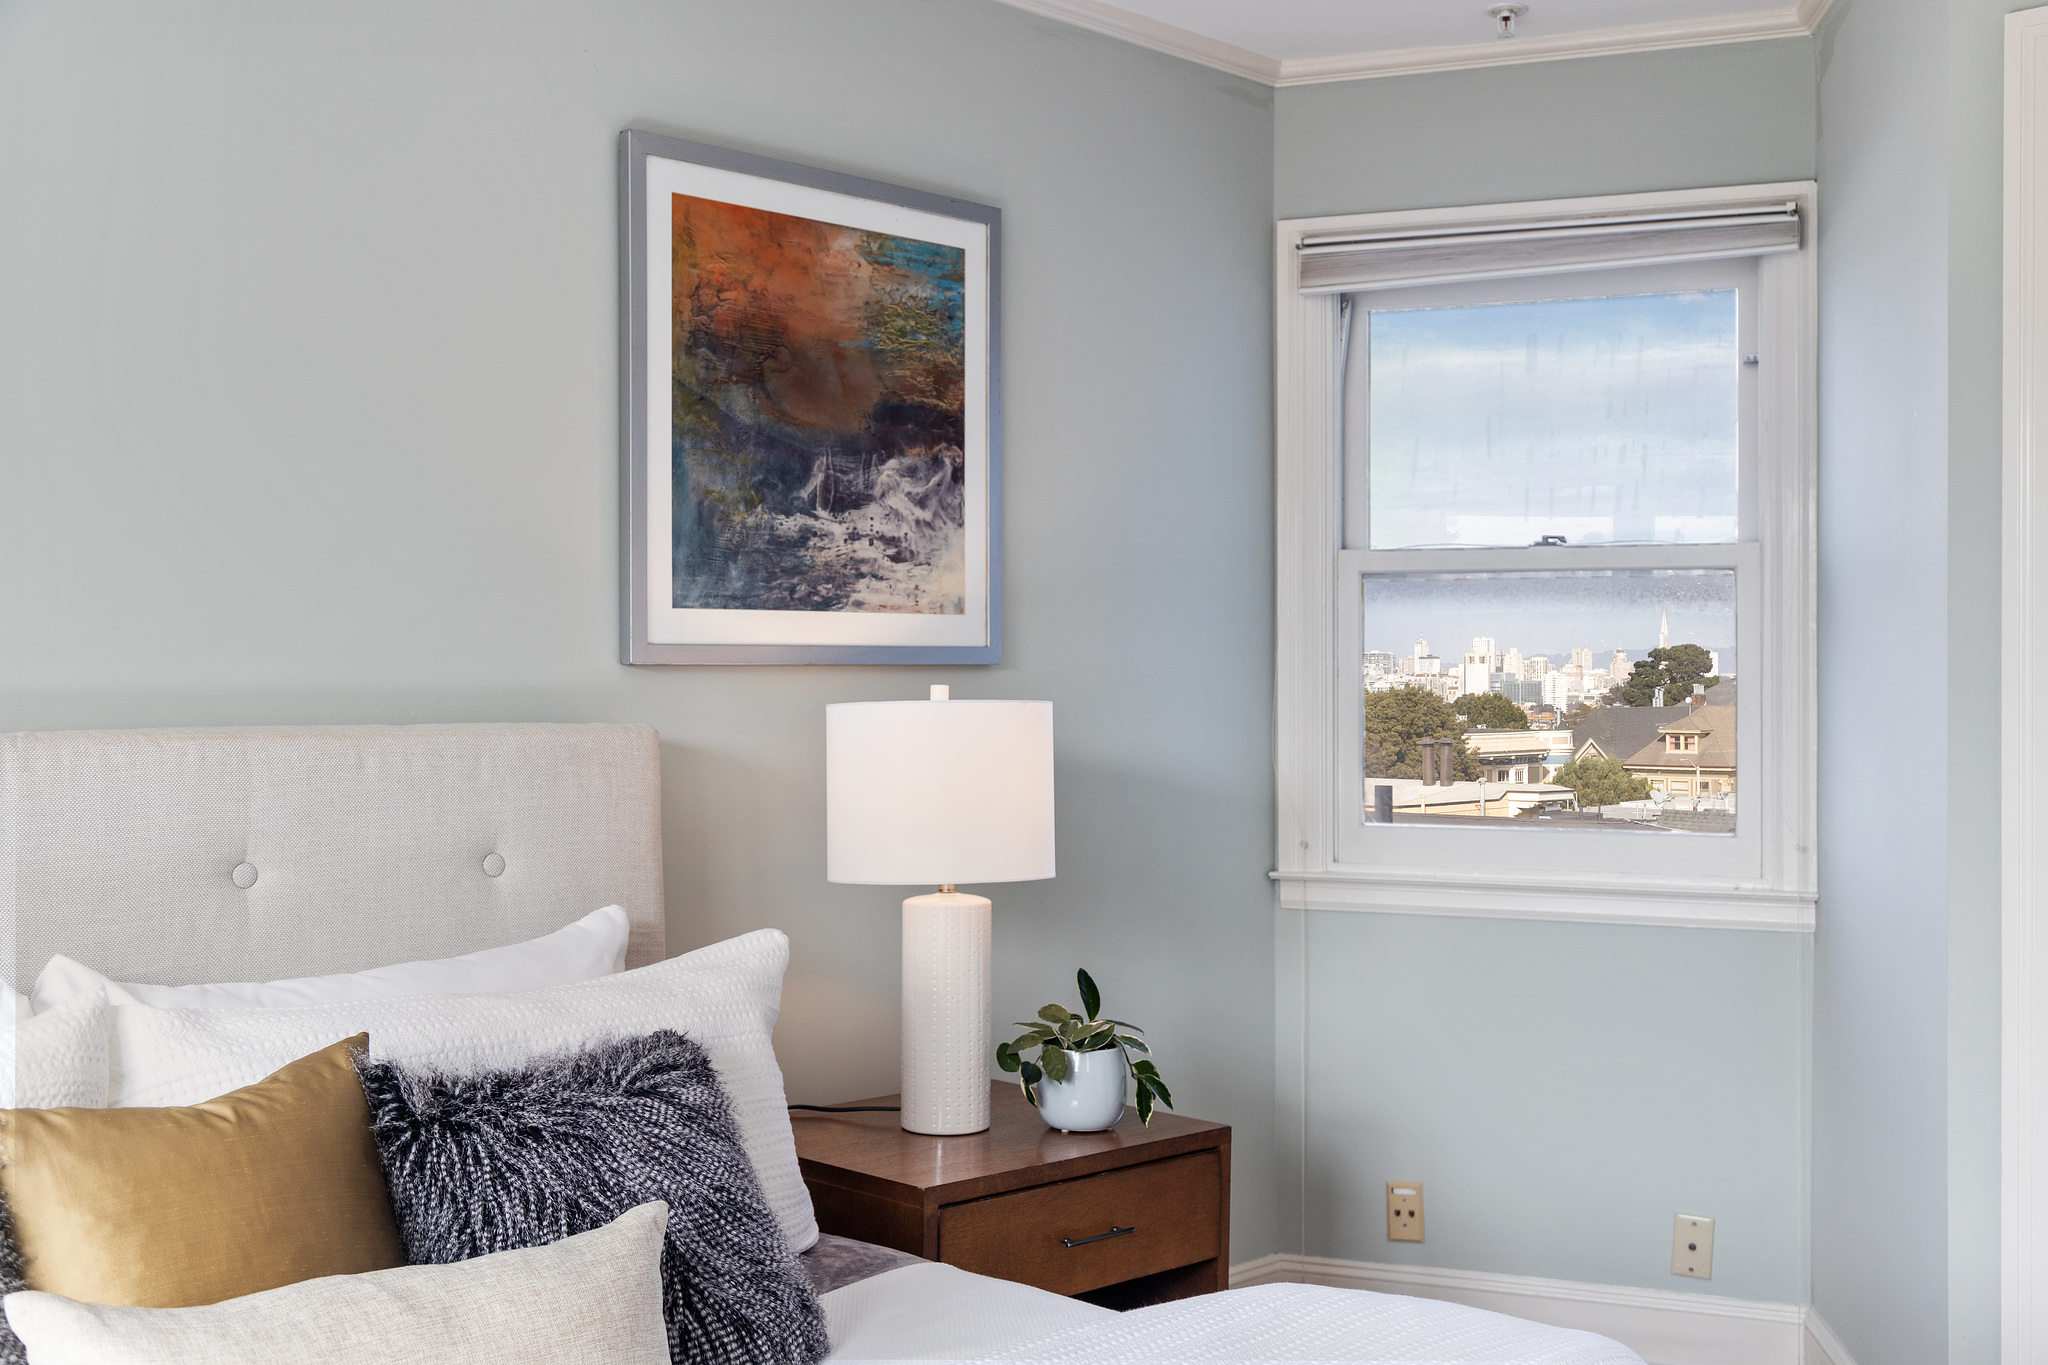 Property Photo: Close-up of the bedroom window overlooking San Francisco